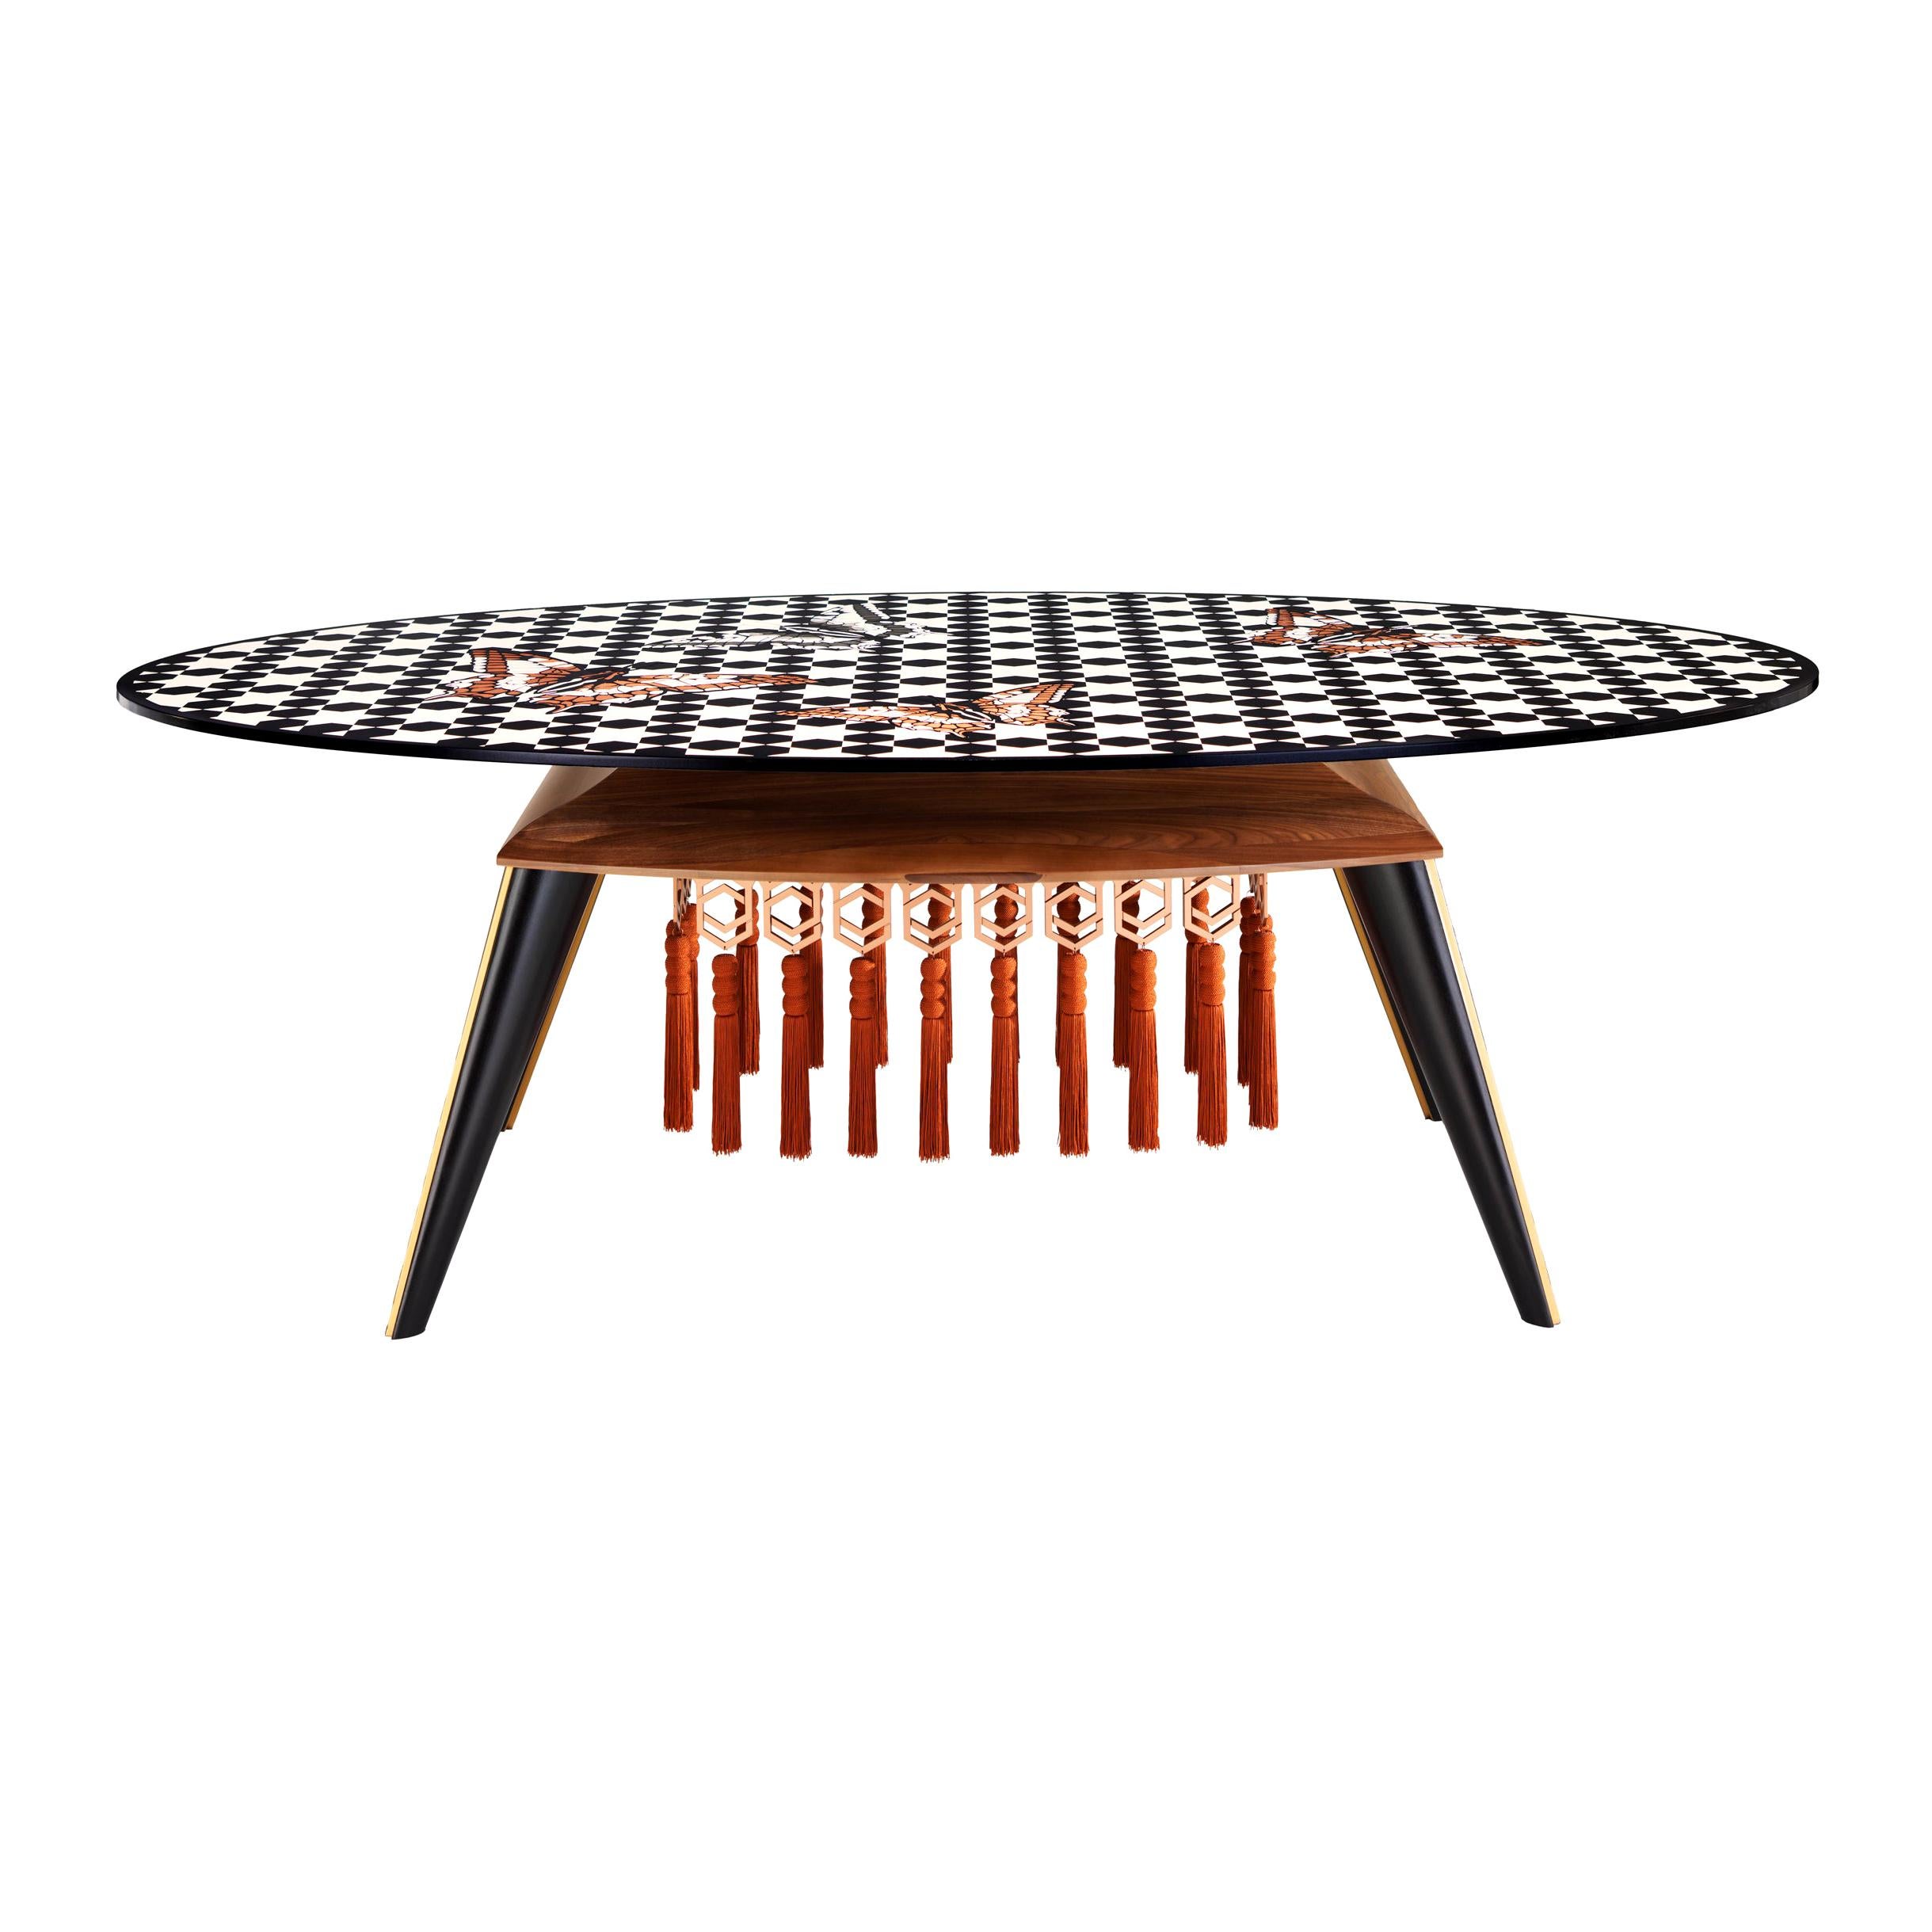 Contemporary White and Black Wood Veneer Oval Table with Copper Decorations For Sale